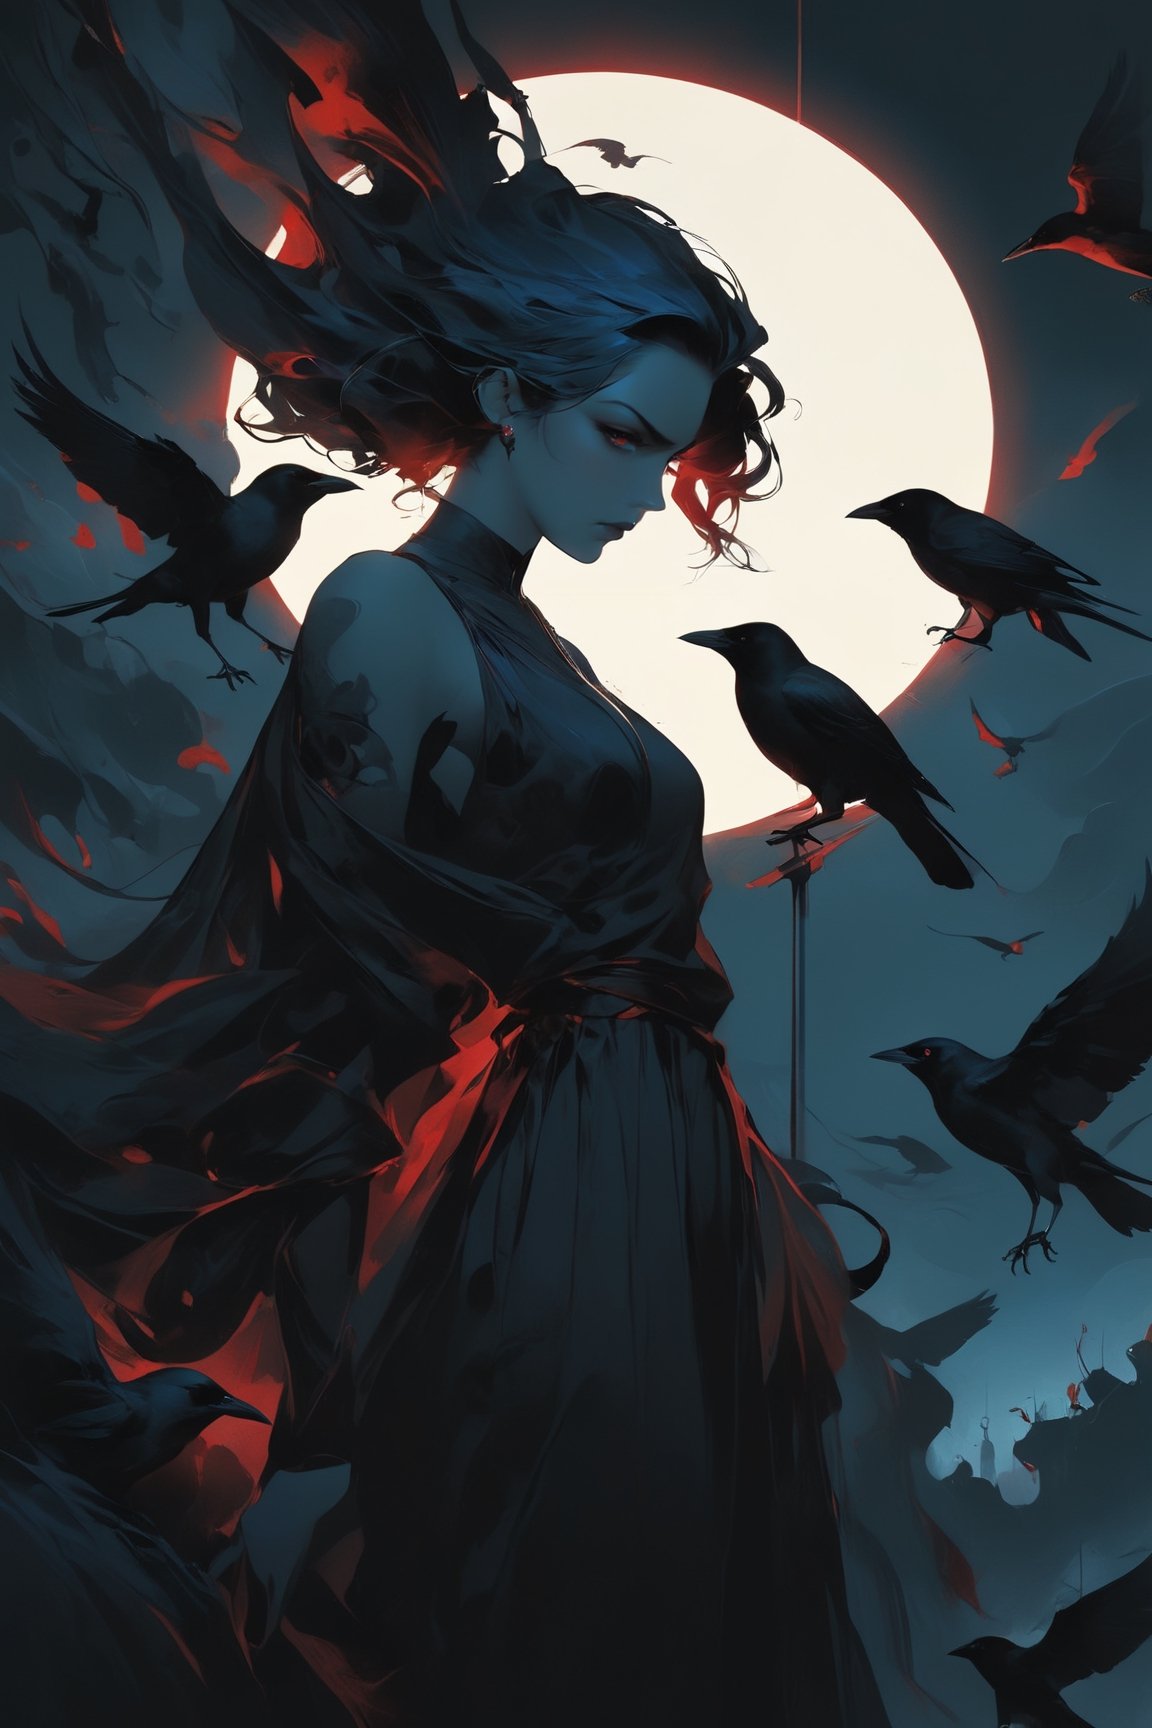 a woman standing in front of a full moon, digital art, Artstation, gothic art, crows as a symbol of death, artgerm and james jean, metal album cover art, 2d art cover, avatar image, joshua middleton comic art, light red and deep blue mood, beautiful depiction,anx13ty_style,twisted_thoughts,ct-niji2